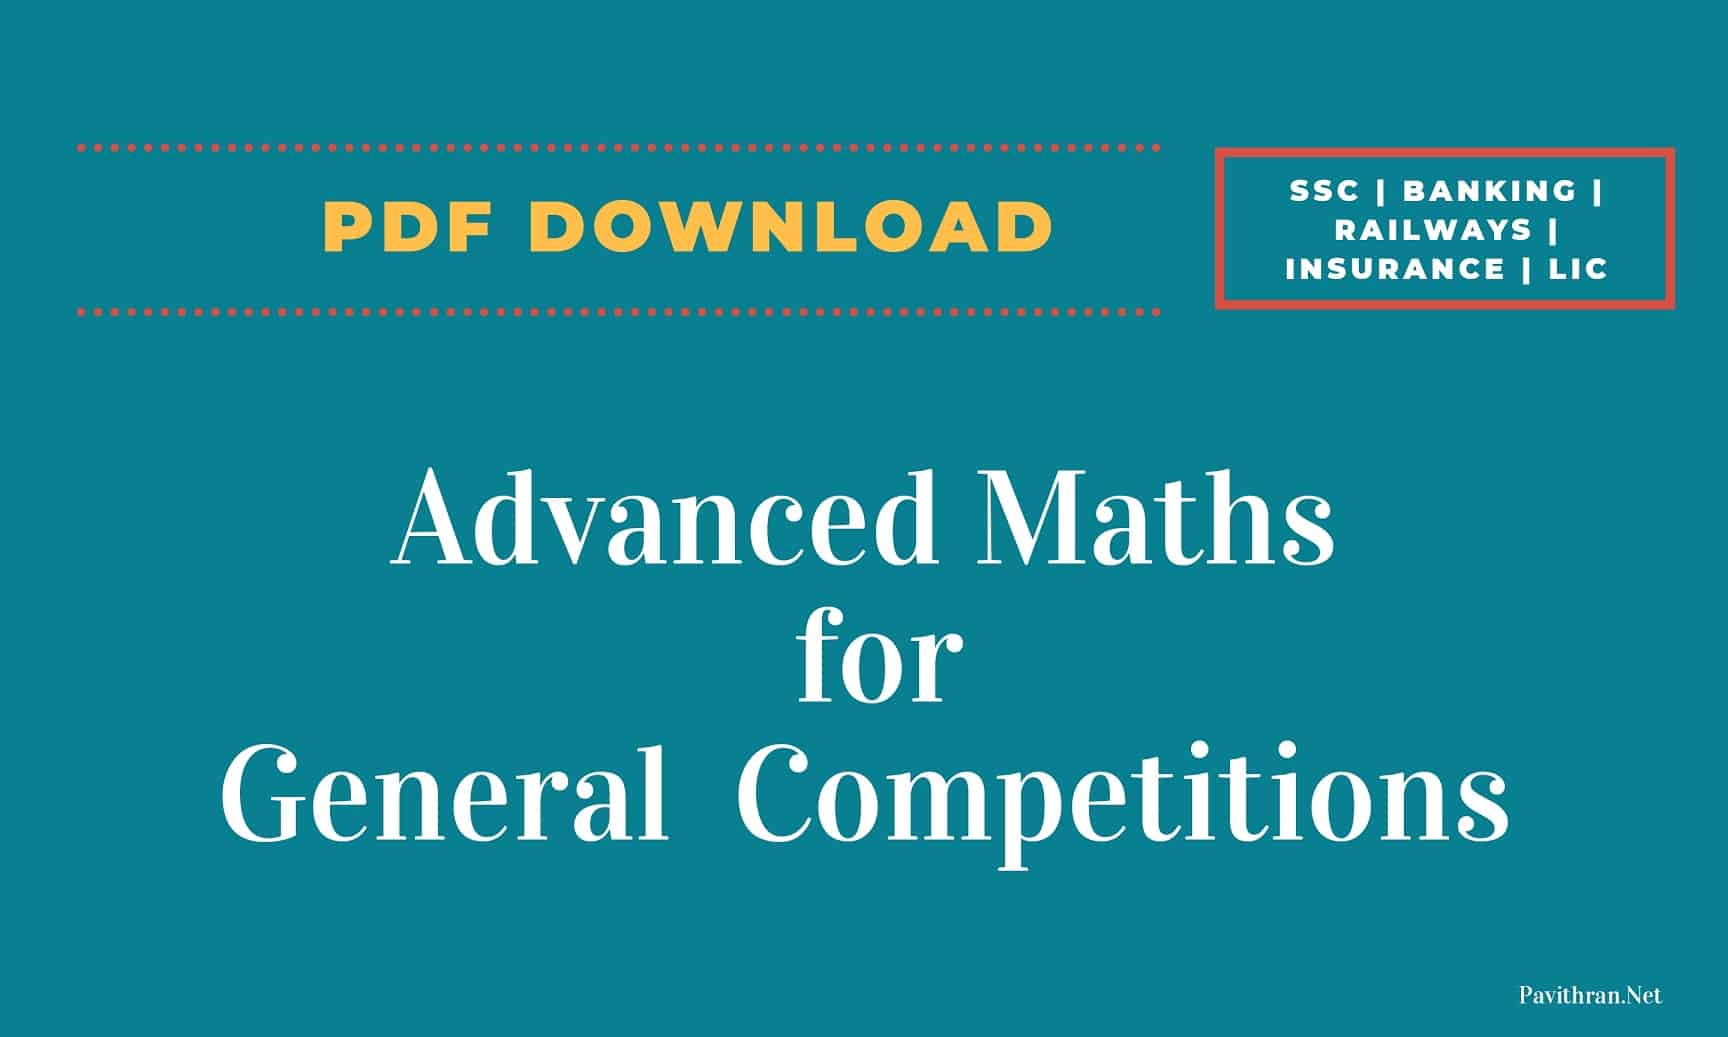 Advanced Maths for General Competitions